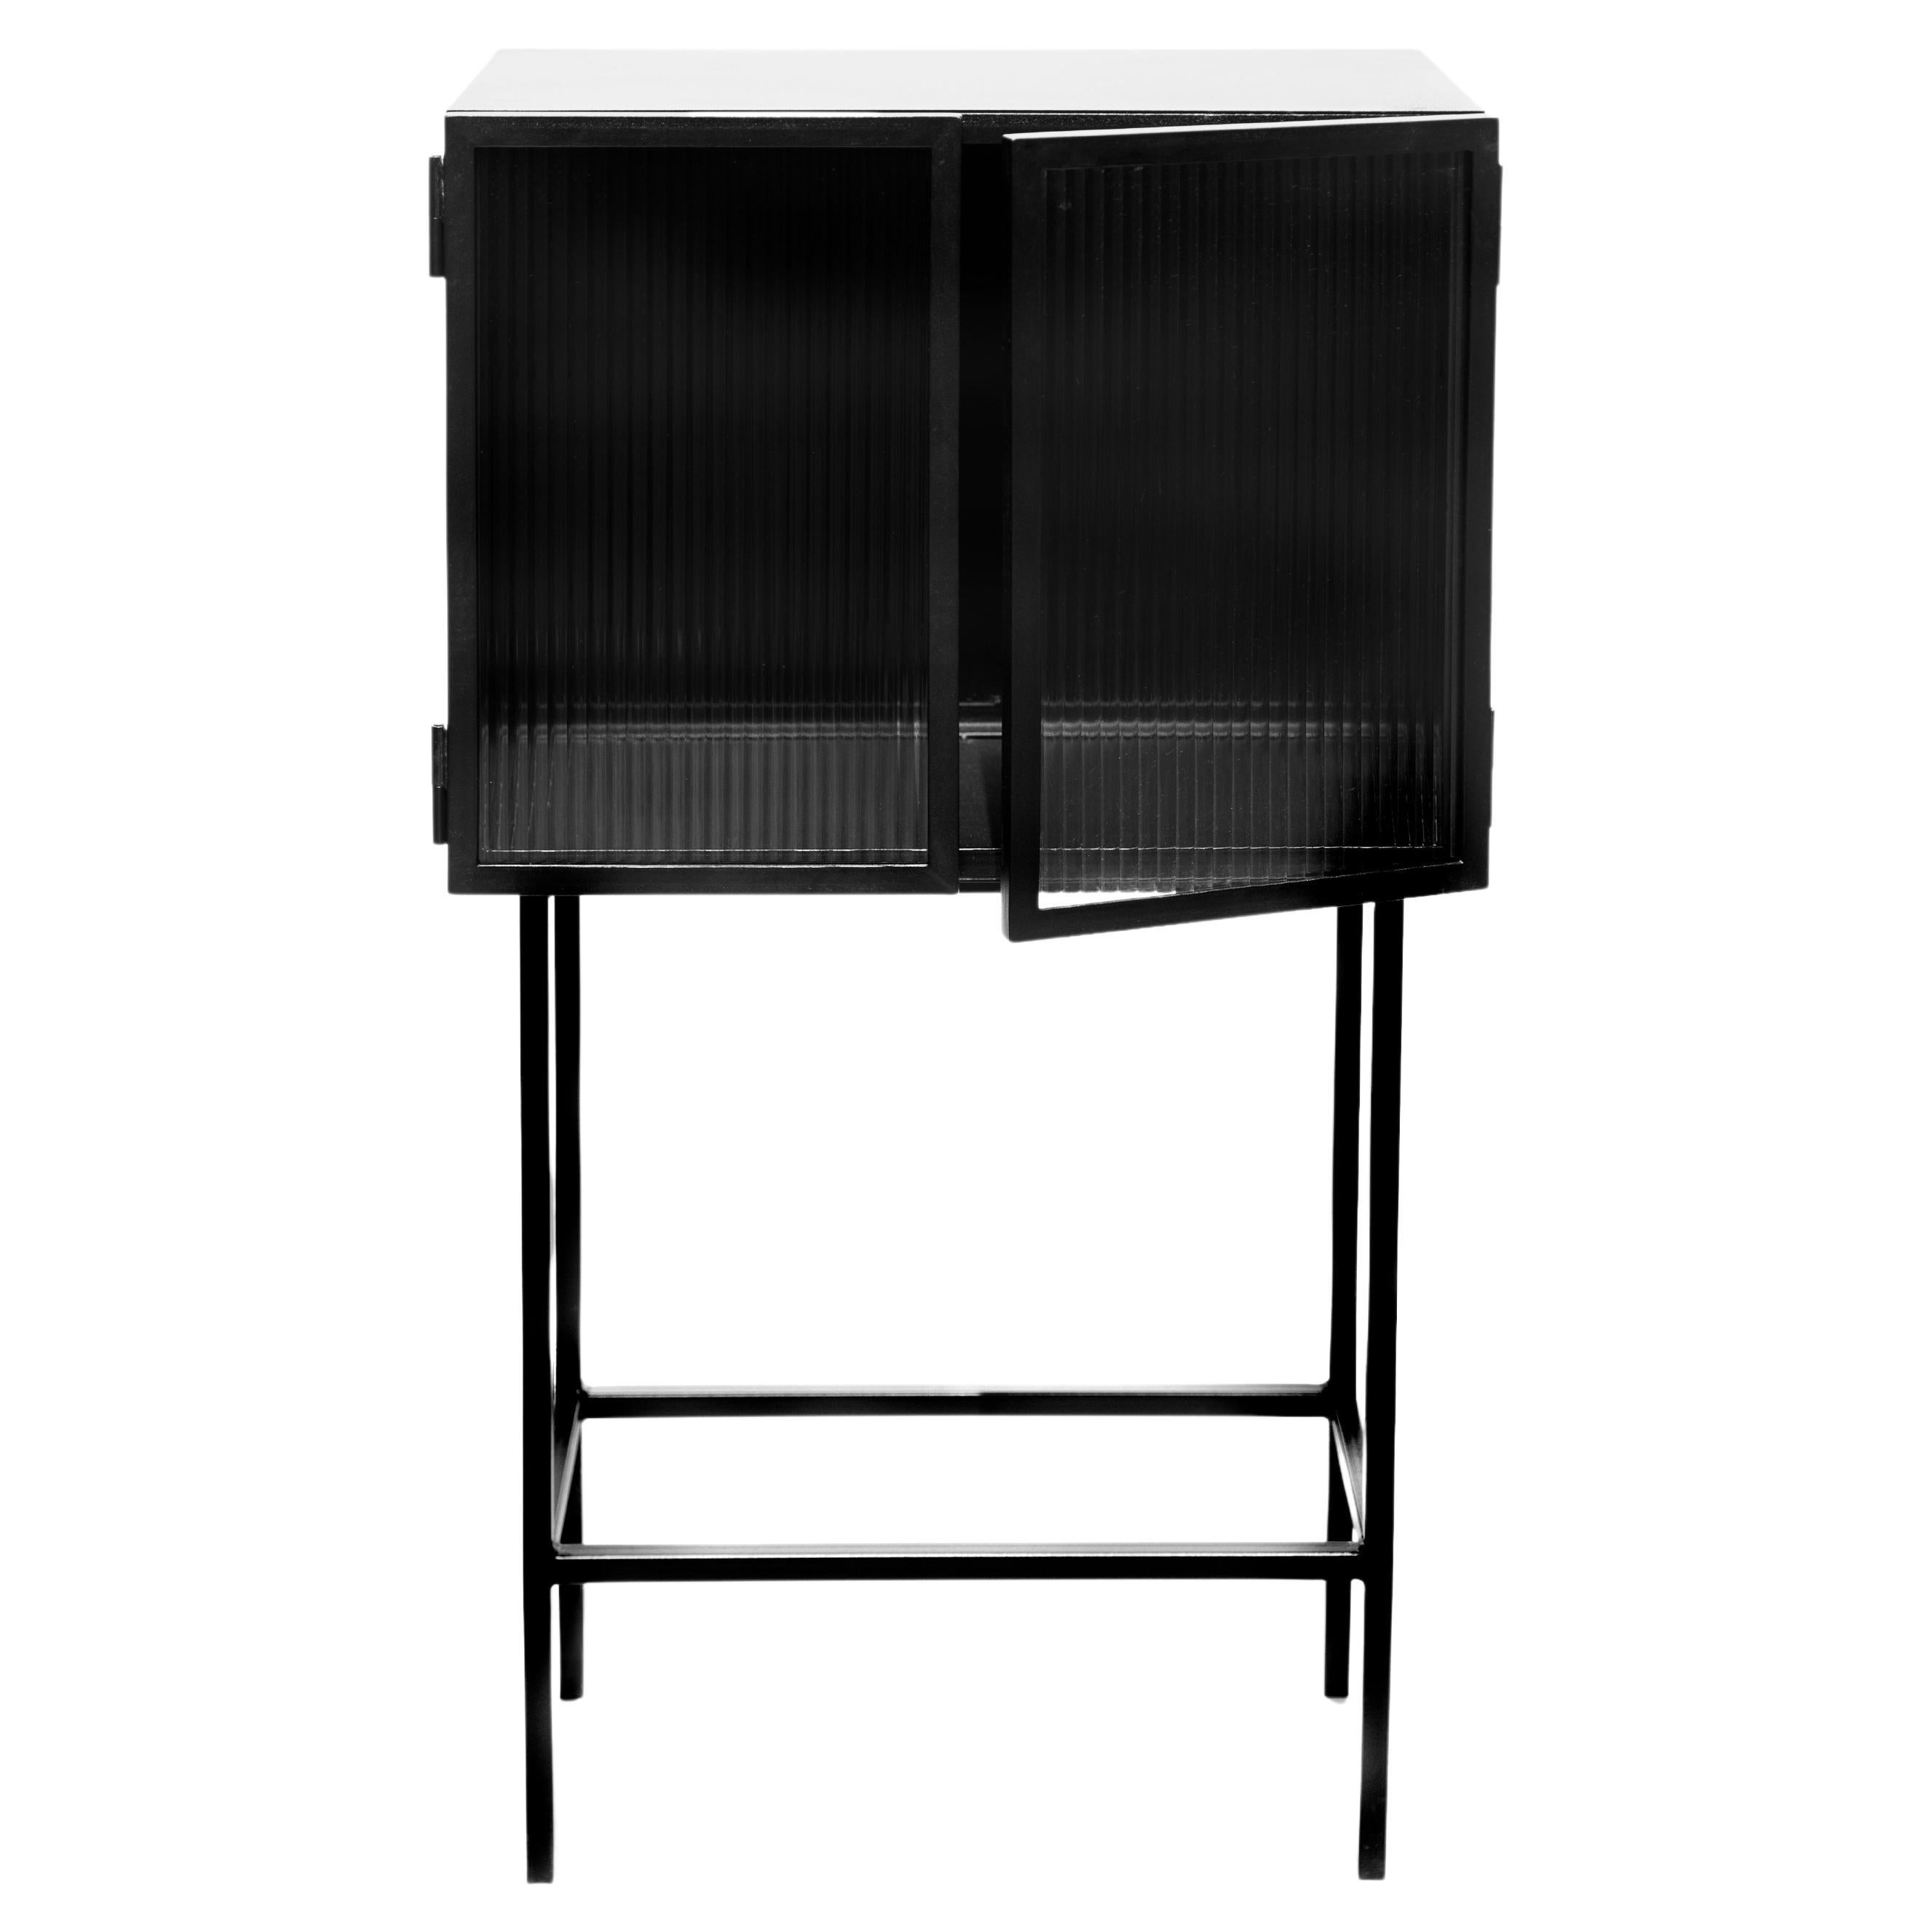 Outlook Forfatter solidaritet Object 021 Cabinet by Ng Design For Sale at 1stDibs